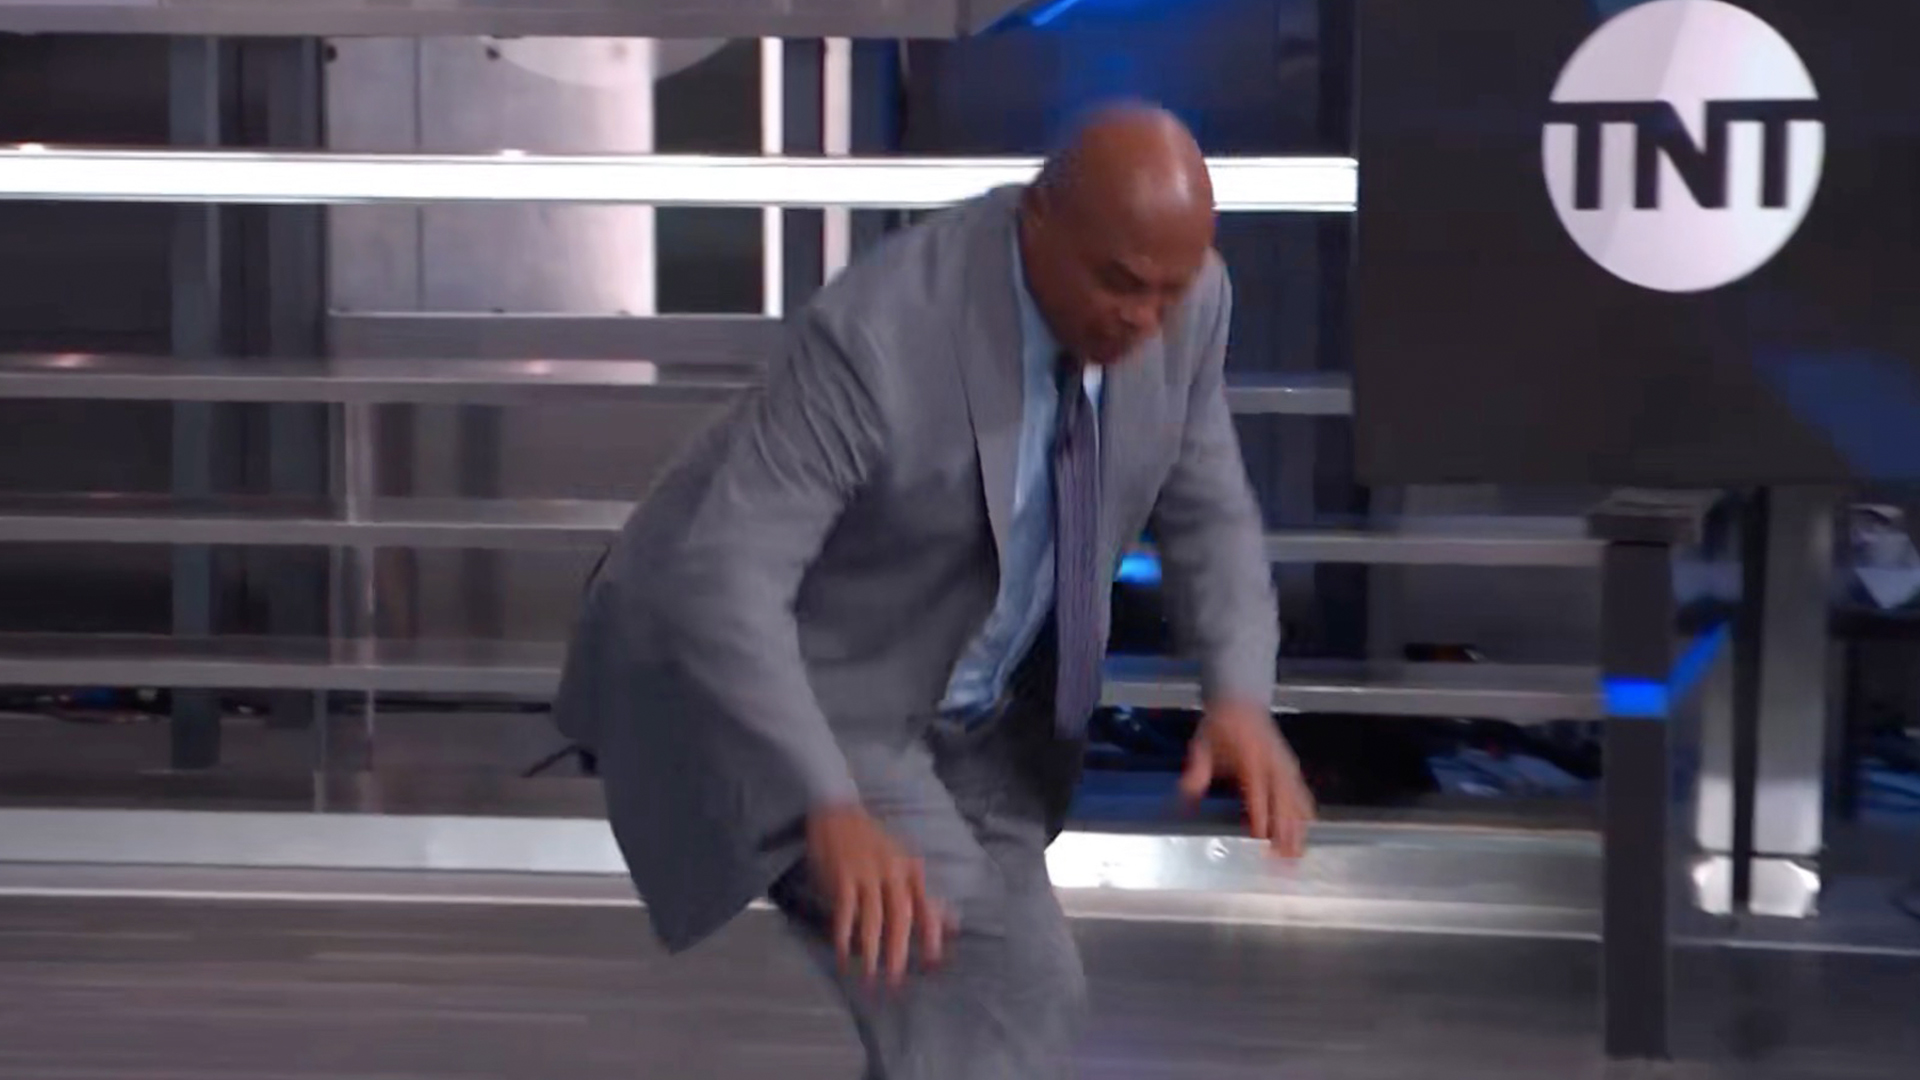 Shaq breaks down in laughter live on Inside The NBA as Charles Barkley gives demo and shouts ‘fall on your ass’ [Video]